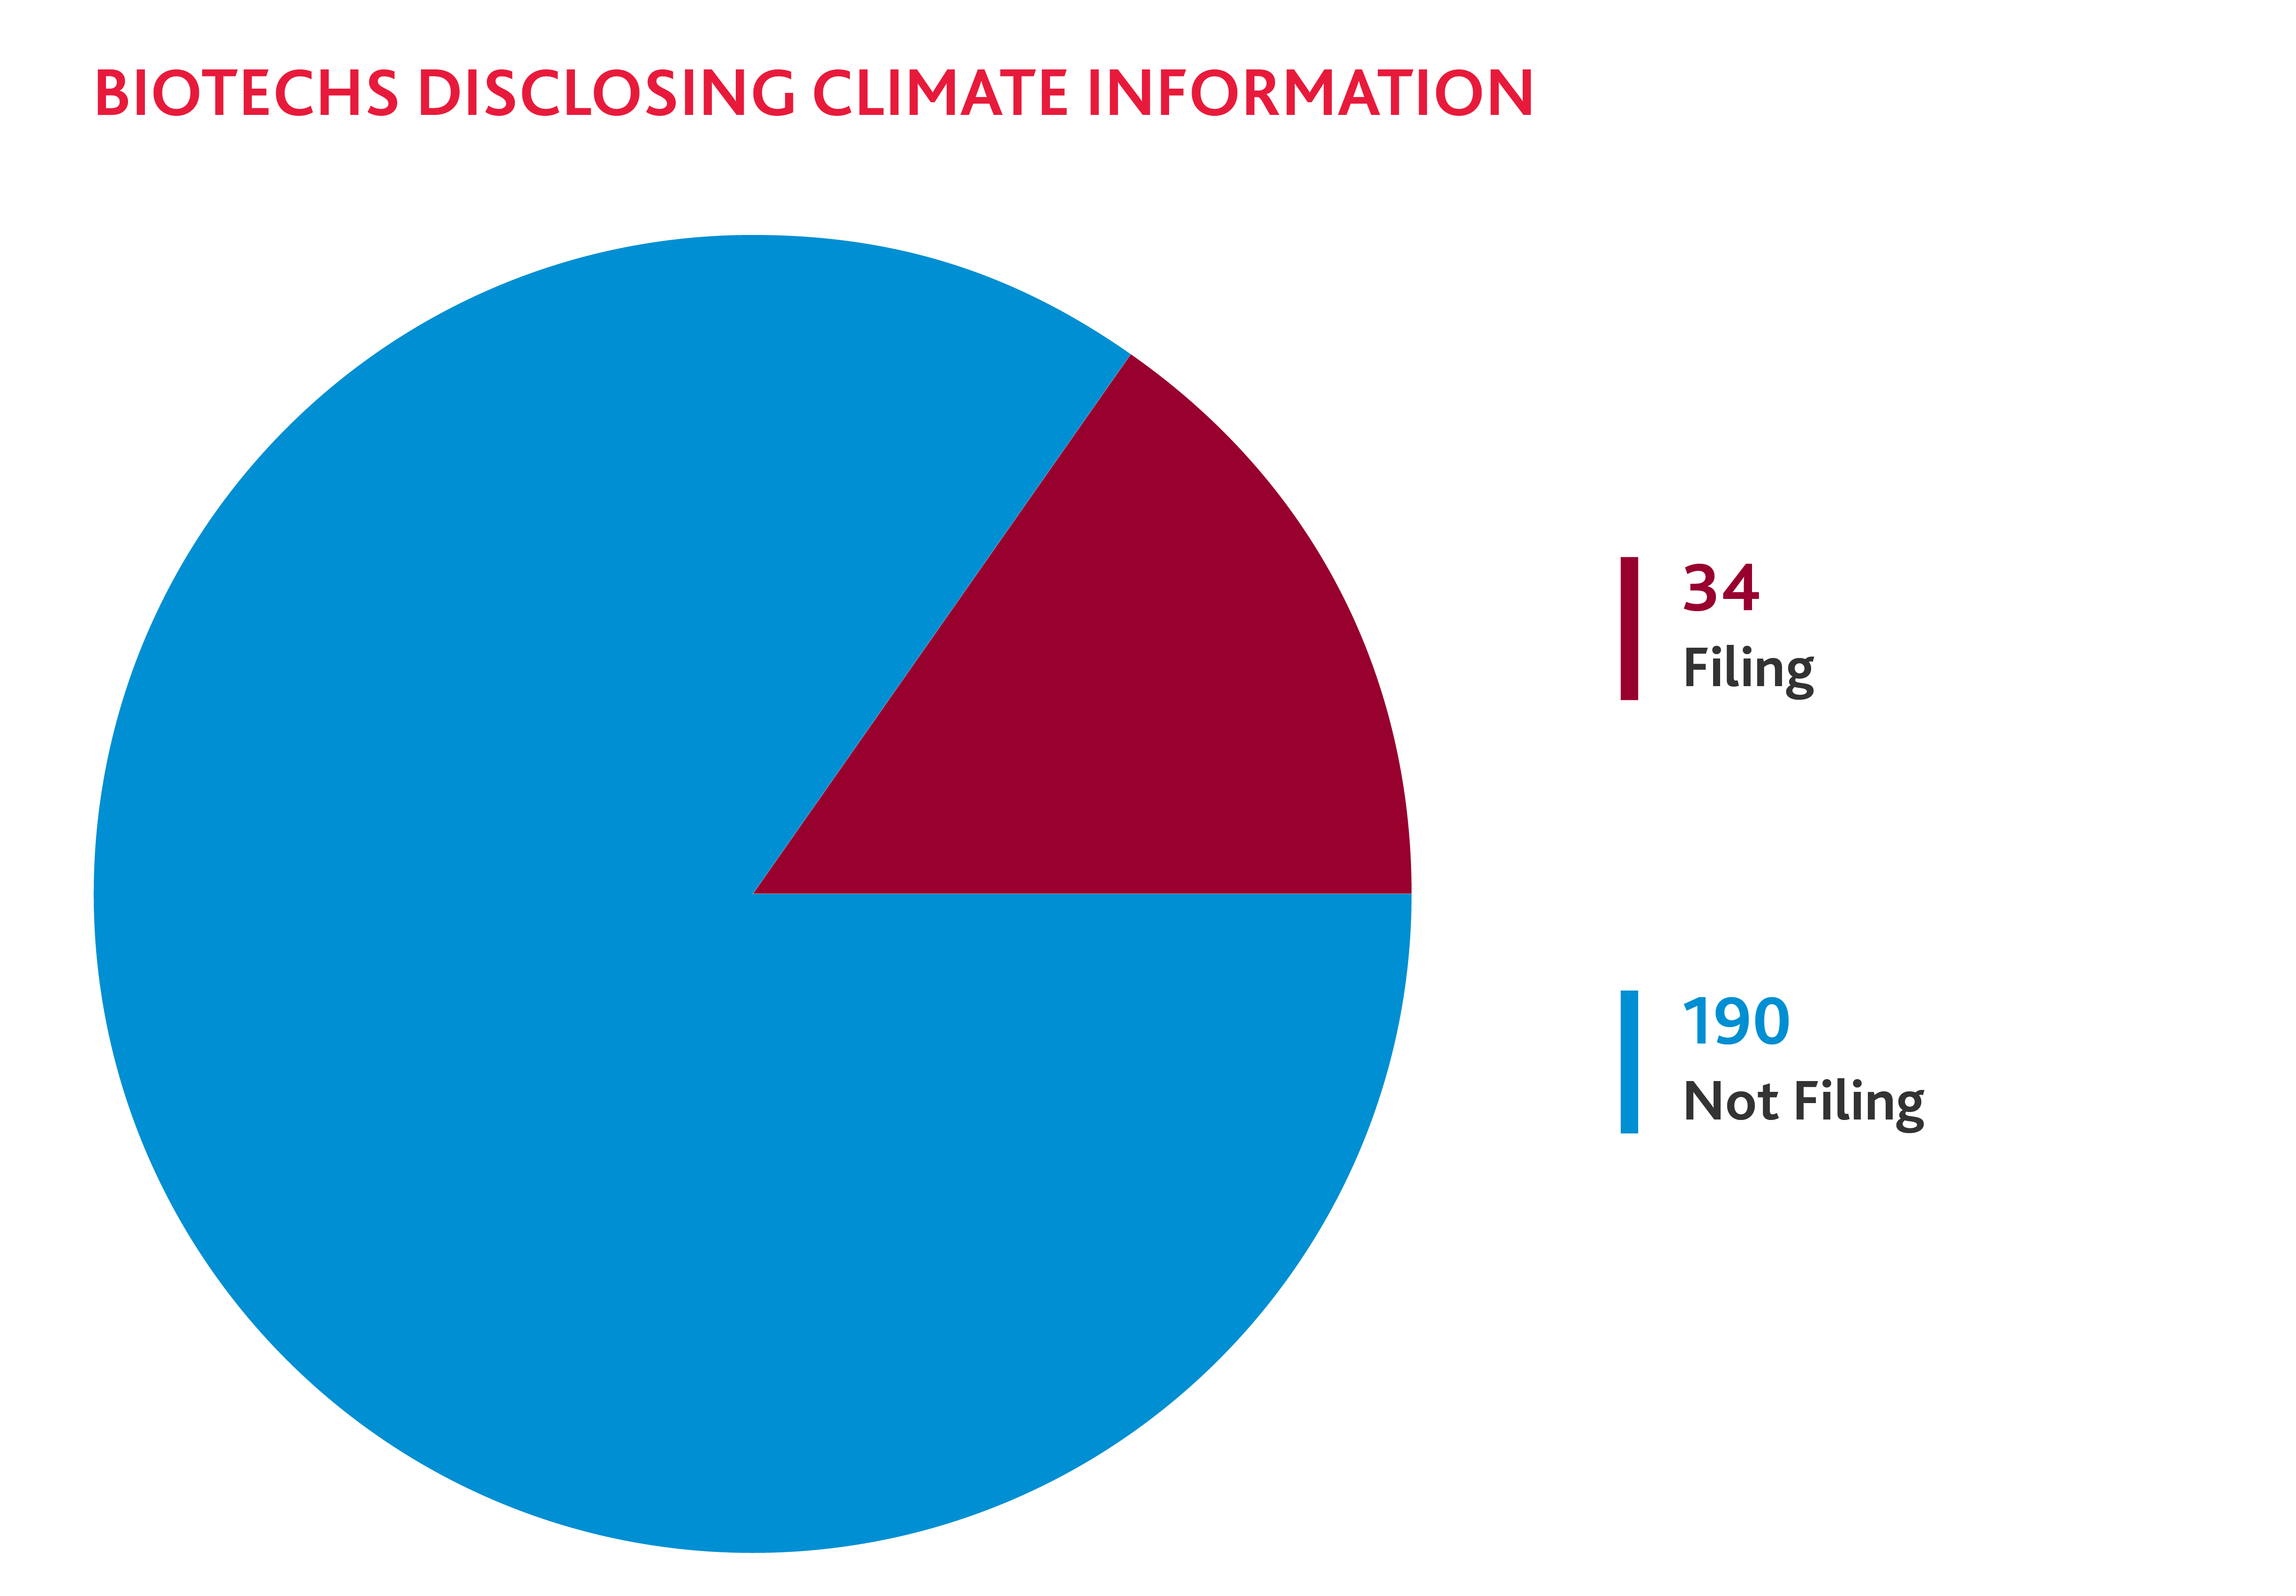 Pie chart showing biotechs disclosing climate information; filing vs not filing